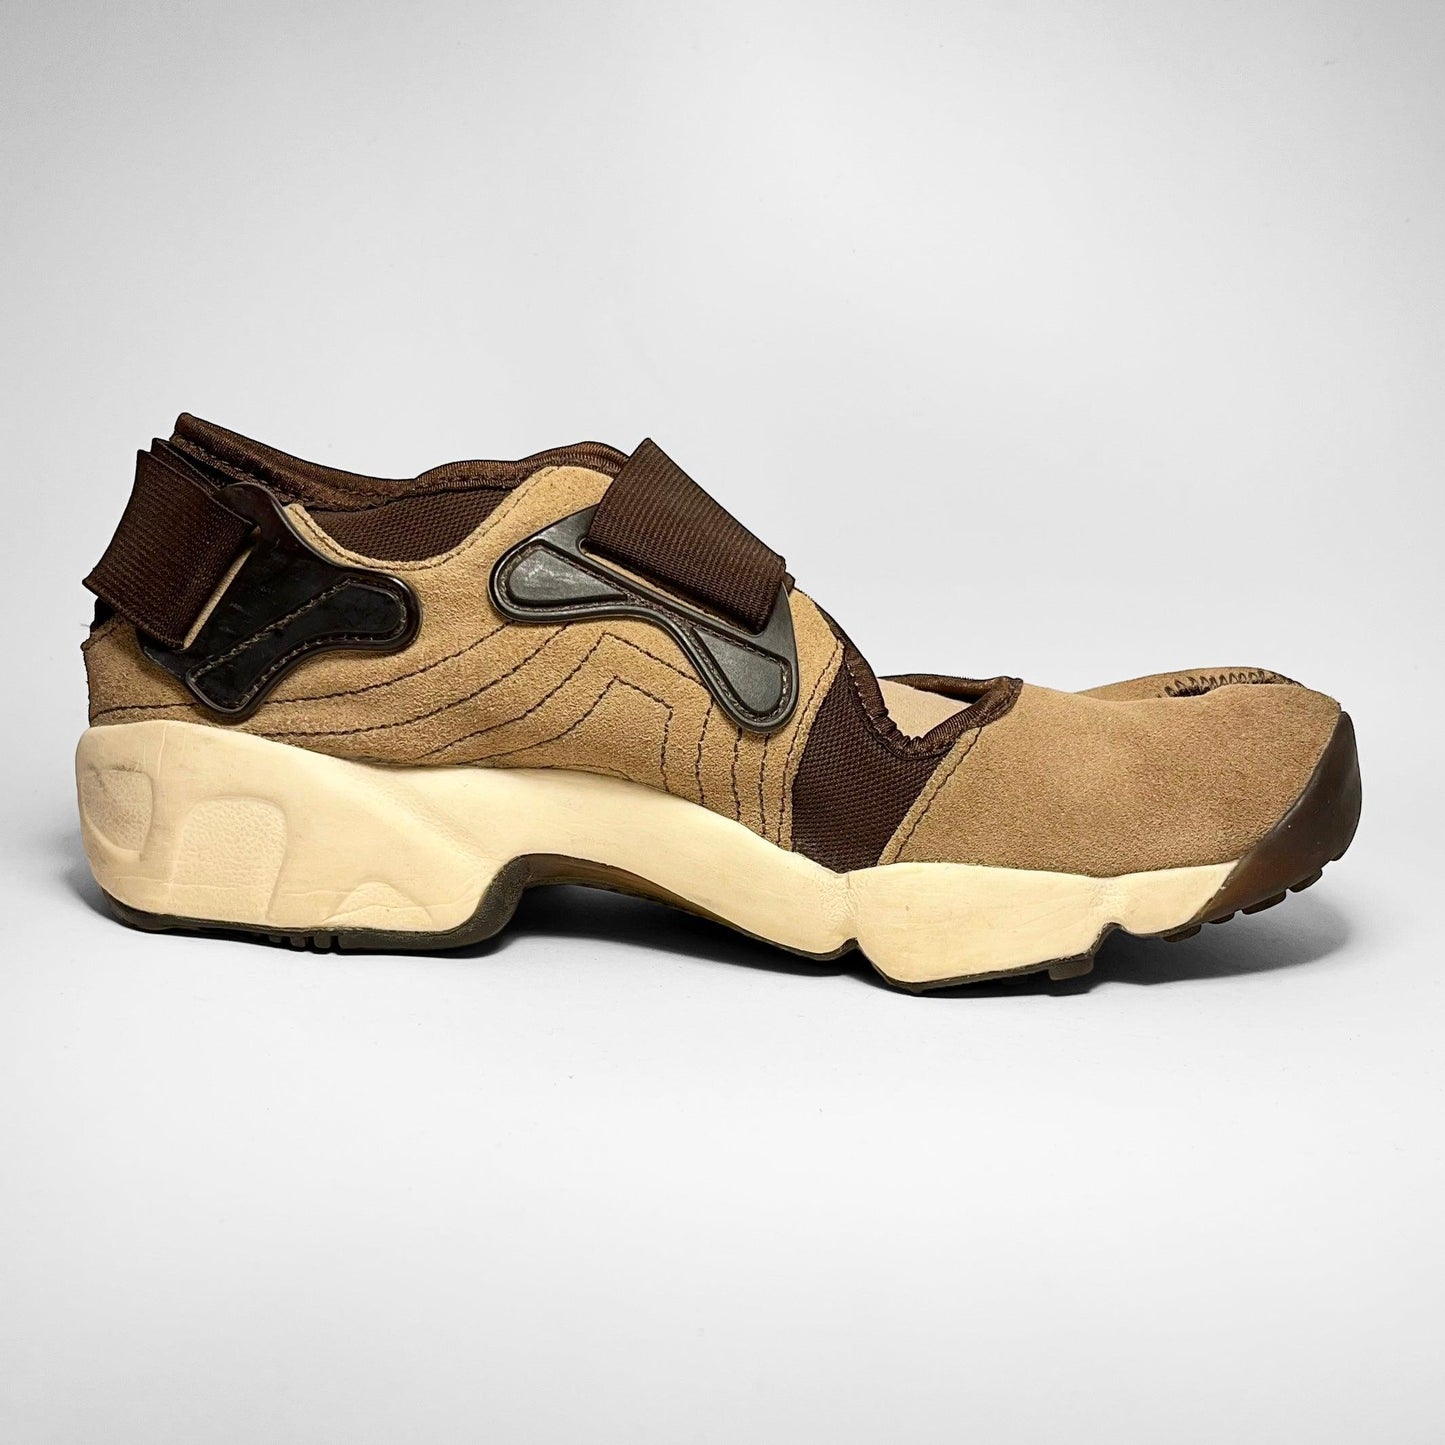 Nike Air Rift Suede (2003) - Known Source